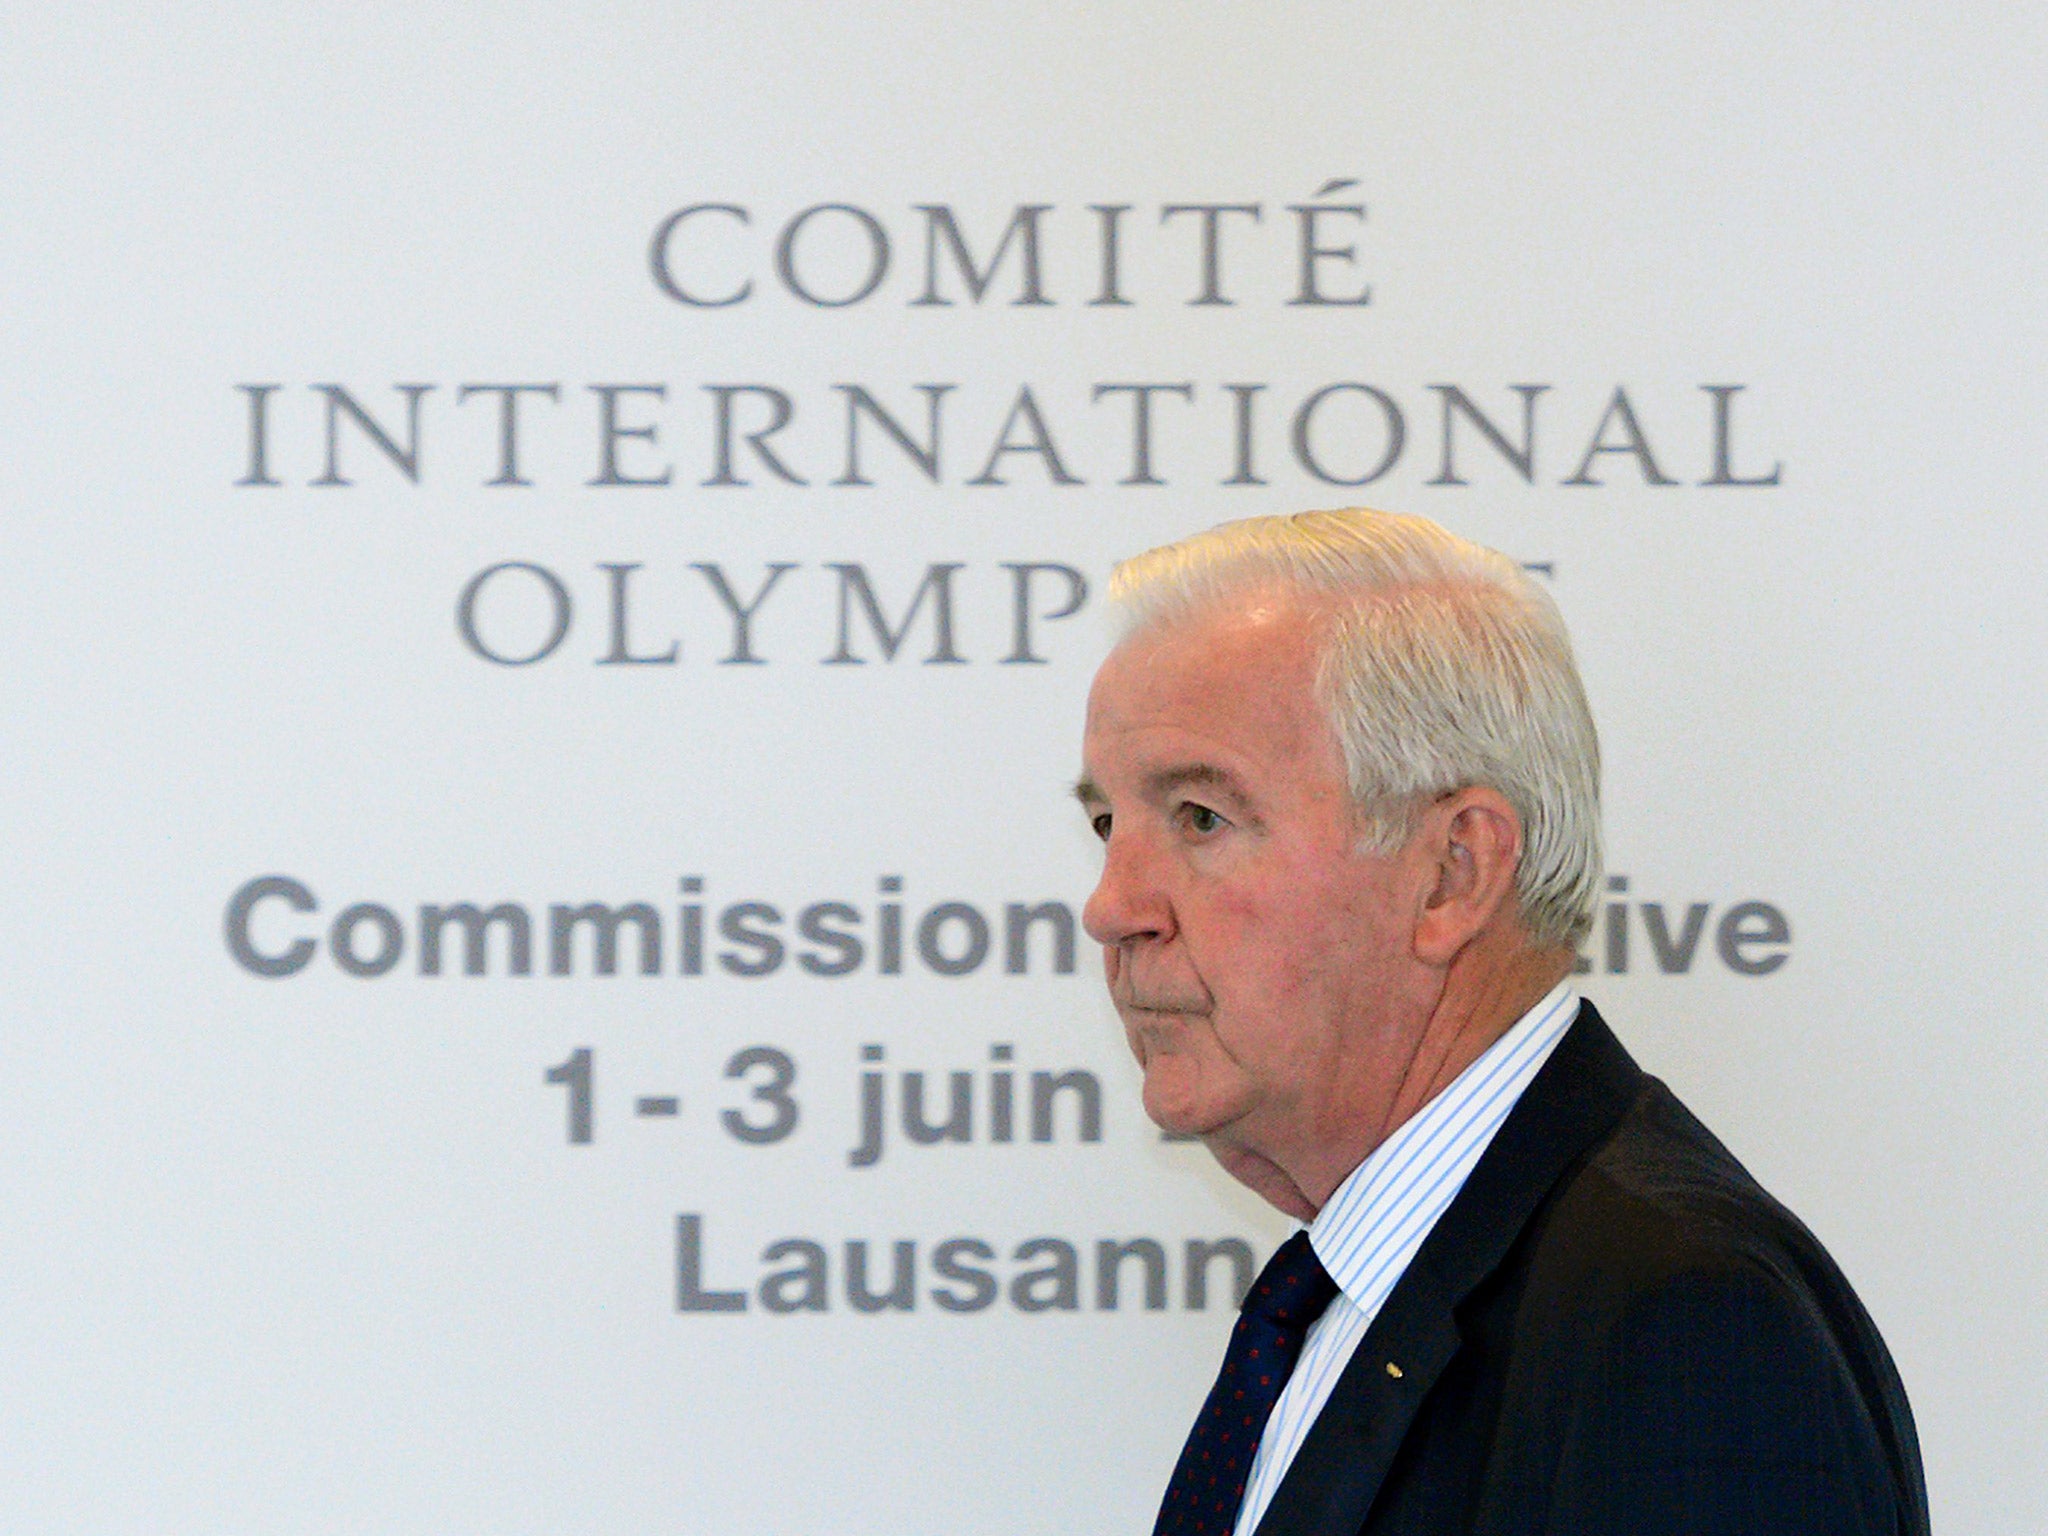 Wada president Crag Reedie made the comments at a conference in London